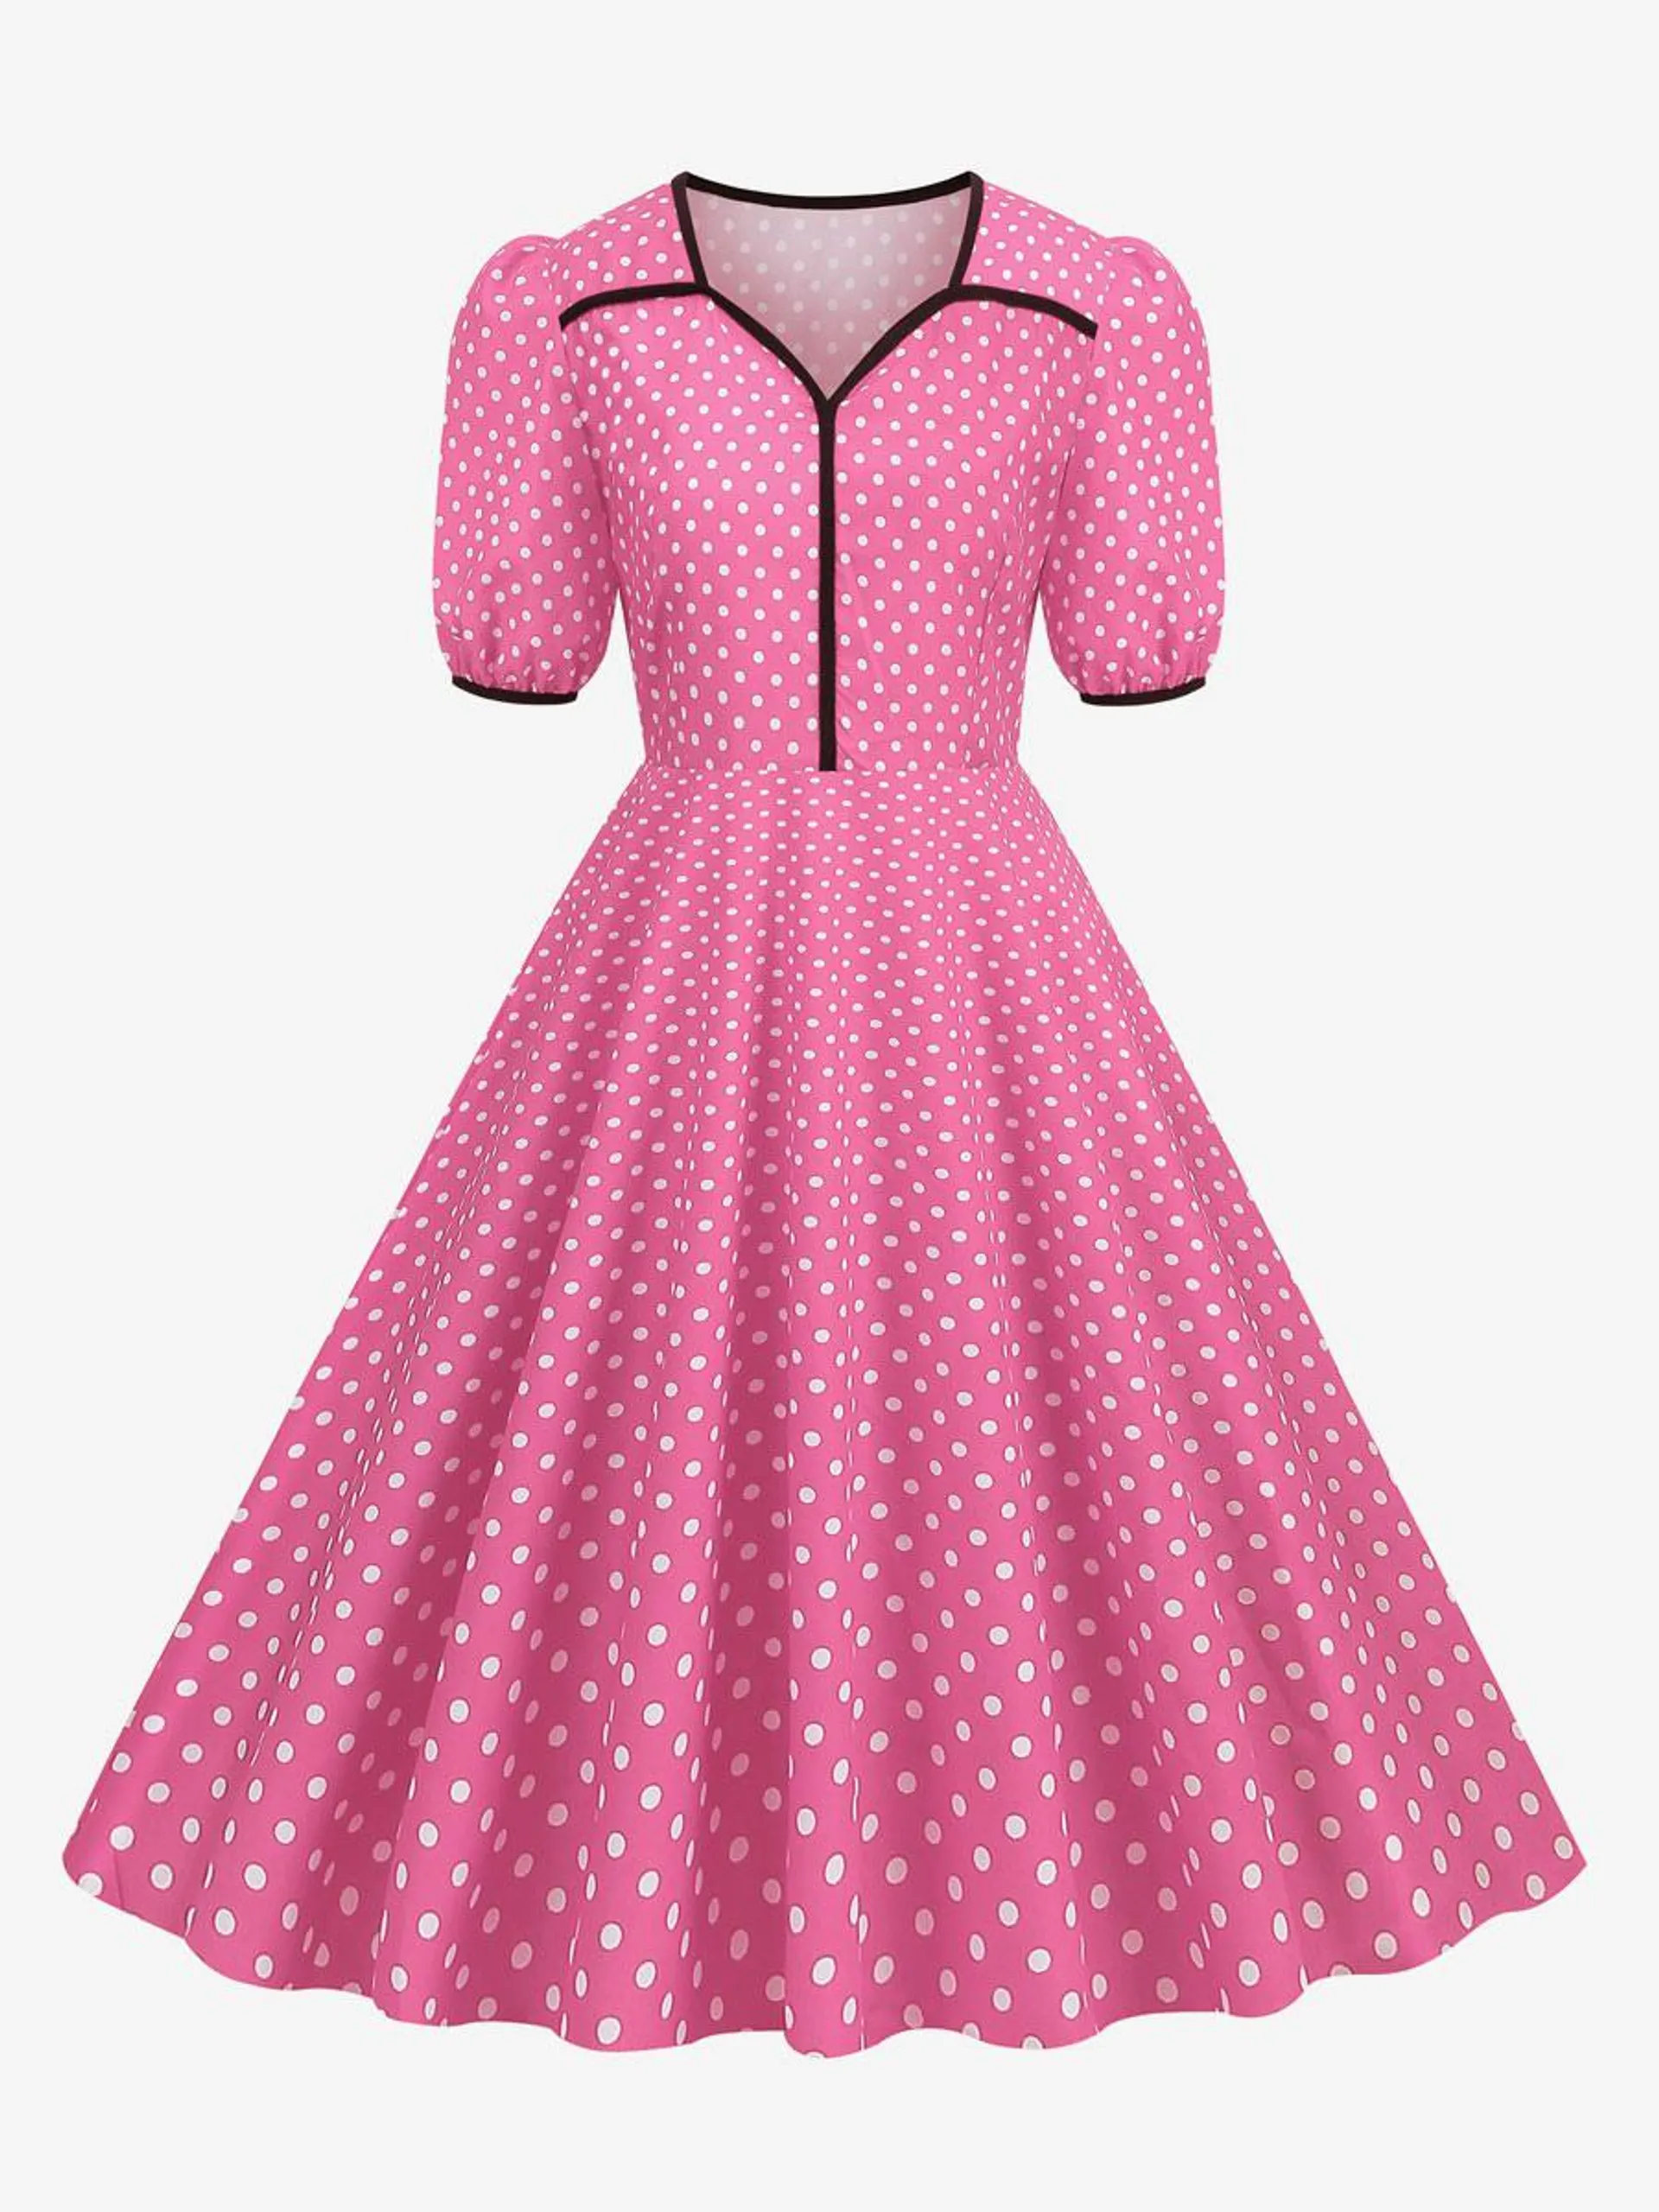 Retro Dress 1950s Pink Color Block Layered Short Sleeves Sweetheart Neck Swing Dress